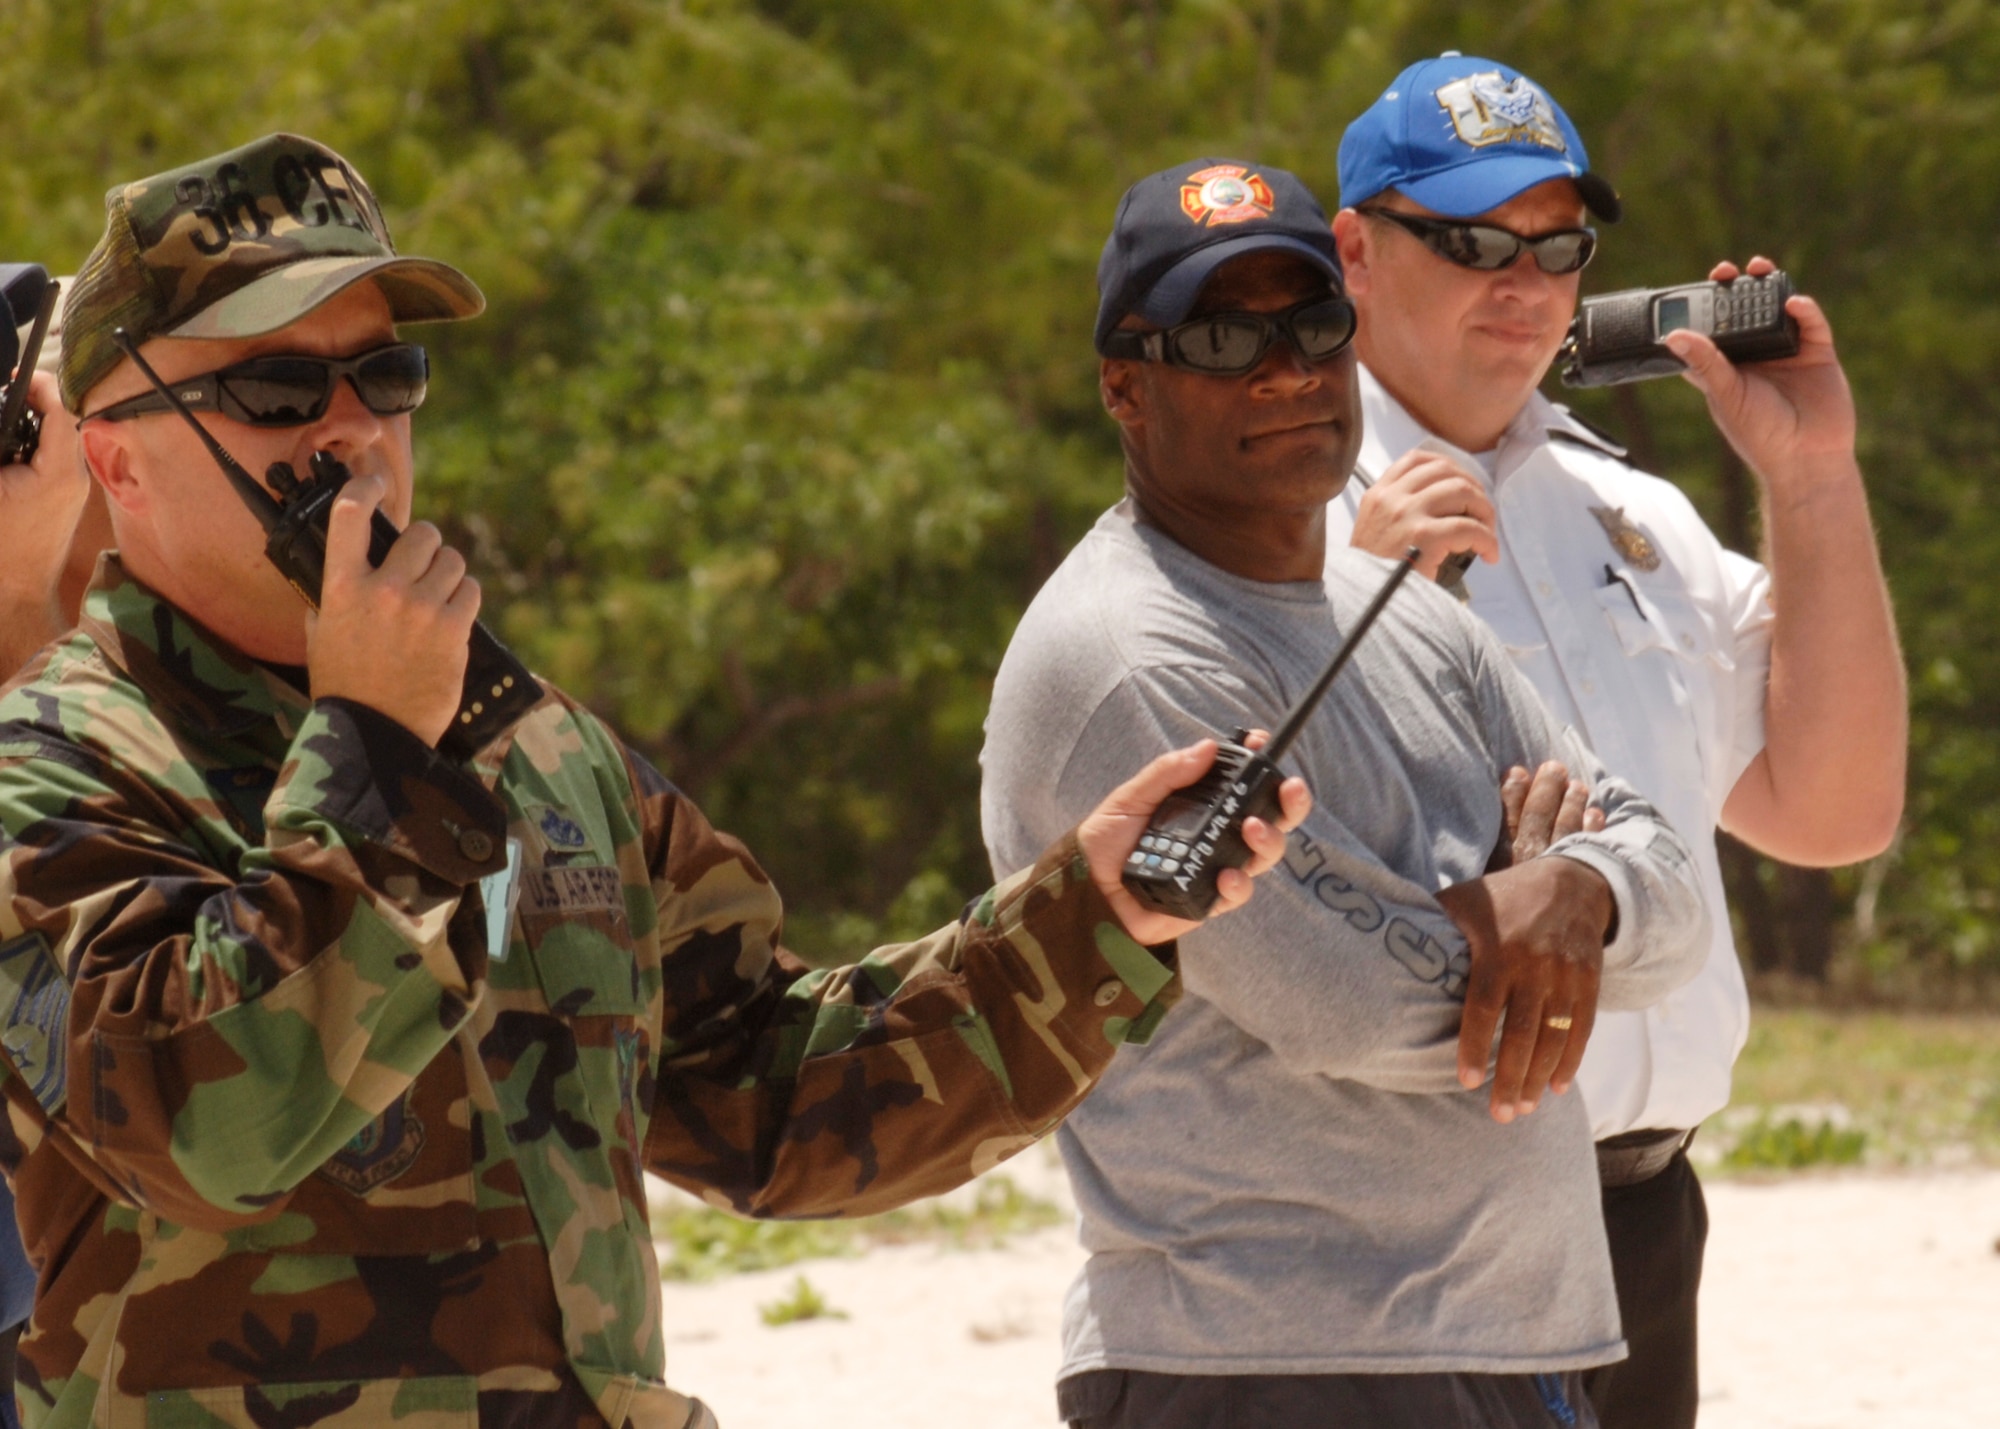 Master Sgt. Daniel Cline Exercise Evaluation Team (EET) Member pass along exercise inputs to Staff Sgt. Francis Tagalog, EET on neighboring Sirena Beach during the Search and Rescue Exercise at Tarague Beach. The exercise enhances the tactical inter-operability within the island of Guam for water rescue emergencies in realistic ocean environment. The SAREX also included members from Guam's police and fire departments, the Navy's Helicopter Sea Combat Squadron 25, Coast Guard, Jeff's Pirates Cove Rescue Team. (U.S. Air Force photo by Airman 1st Class Nichelle Griffiths)